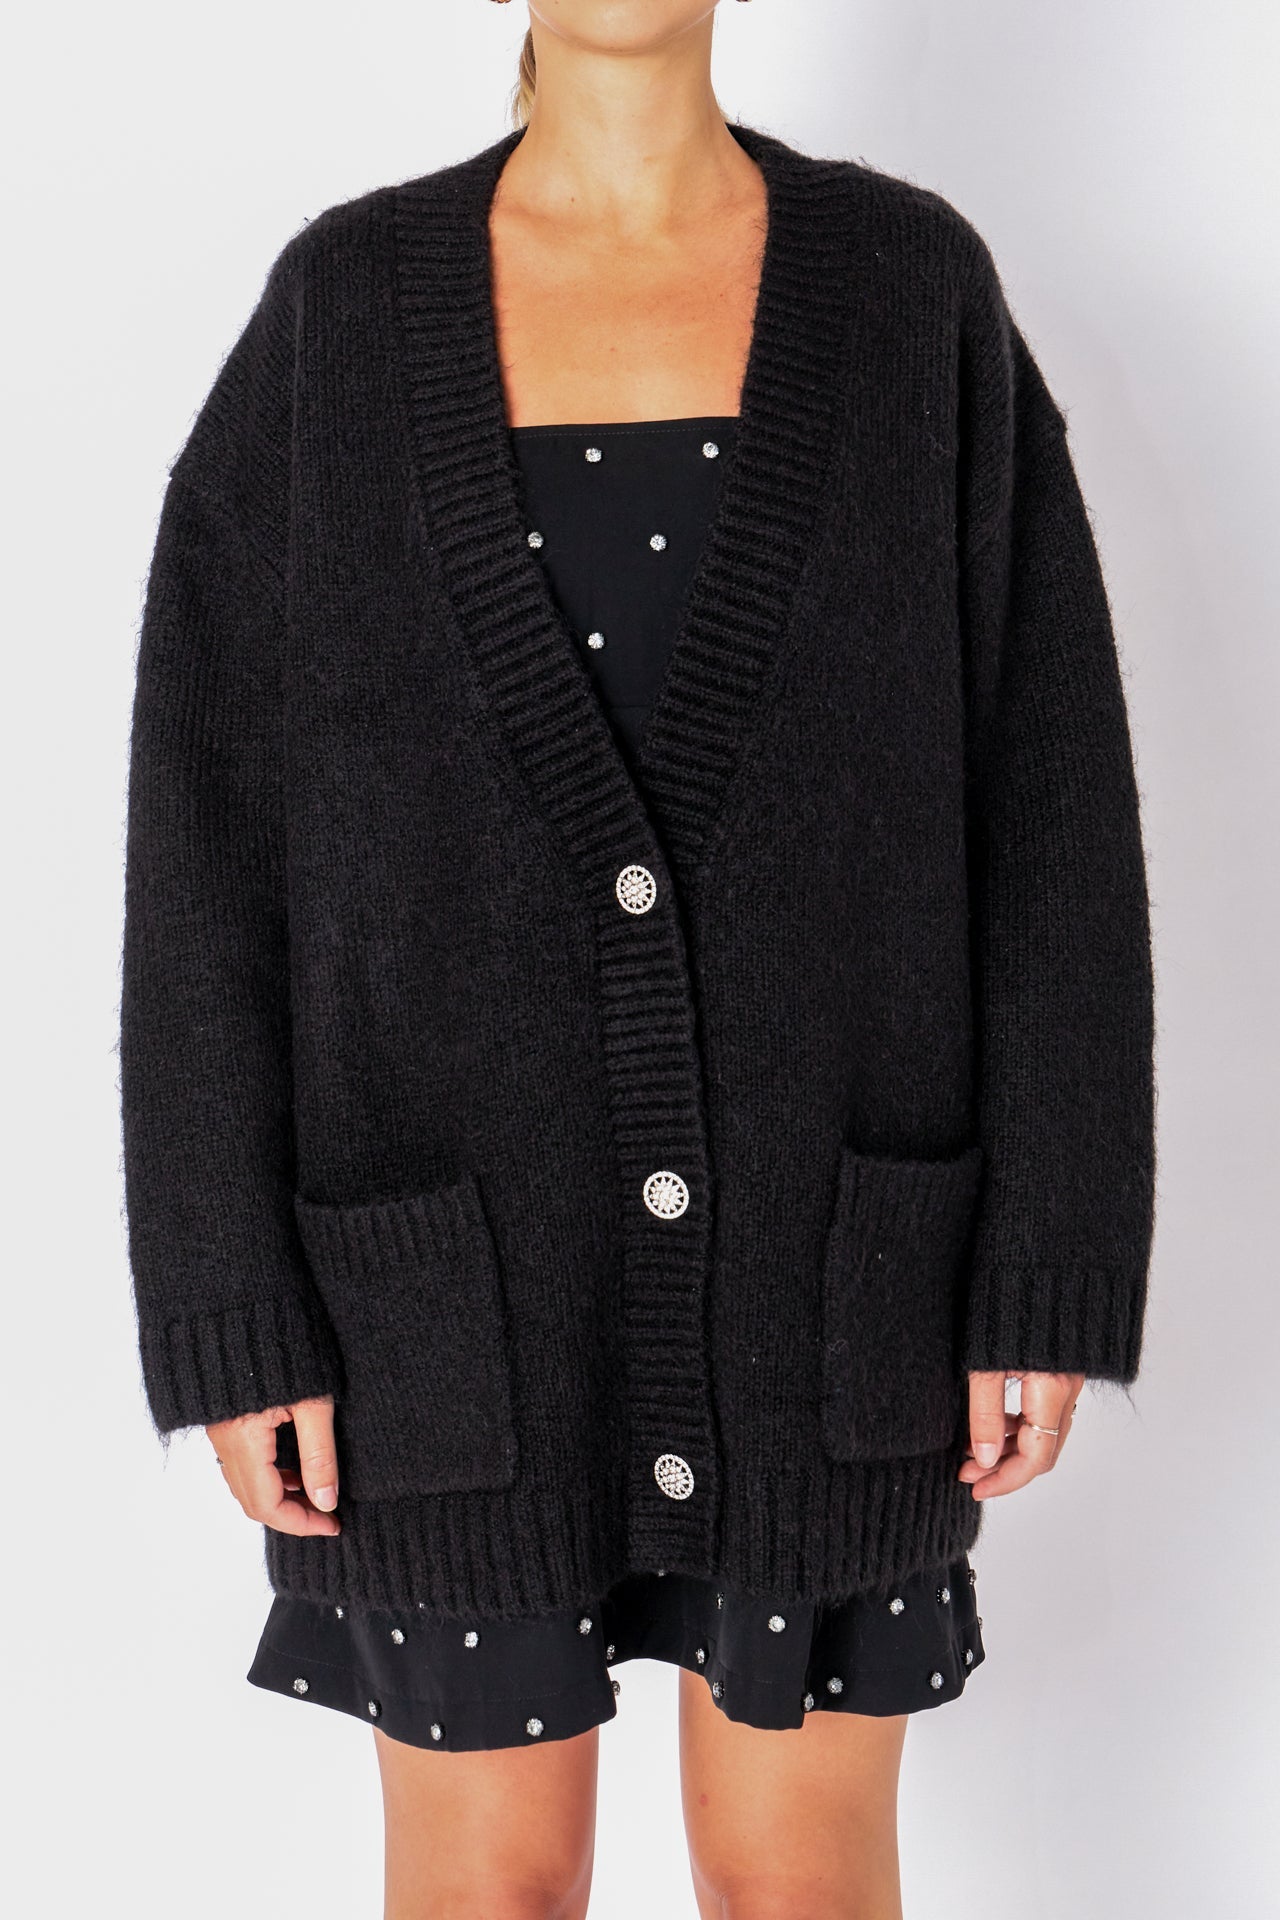 ENDLESS ROSE - Jewel Button Oversize Cardigan - SWEATERS & KNITS available at Objectrare